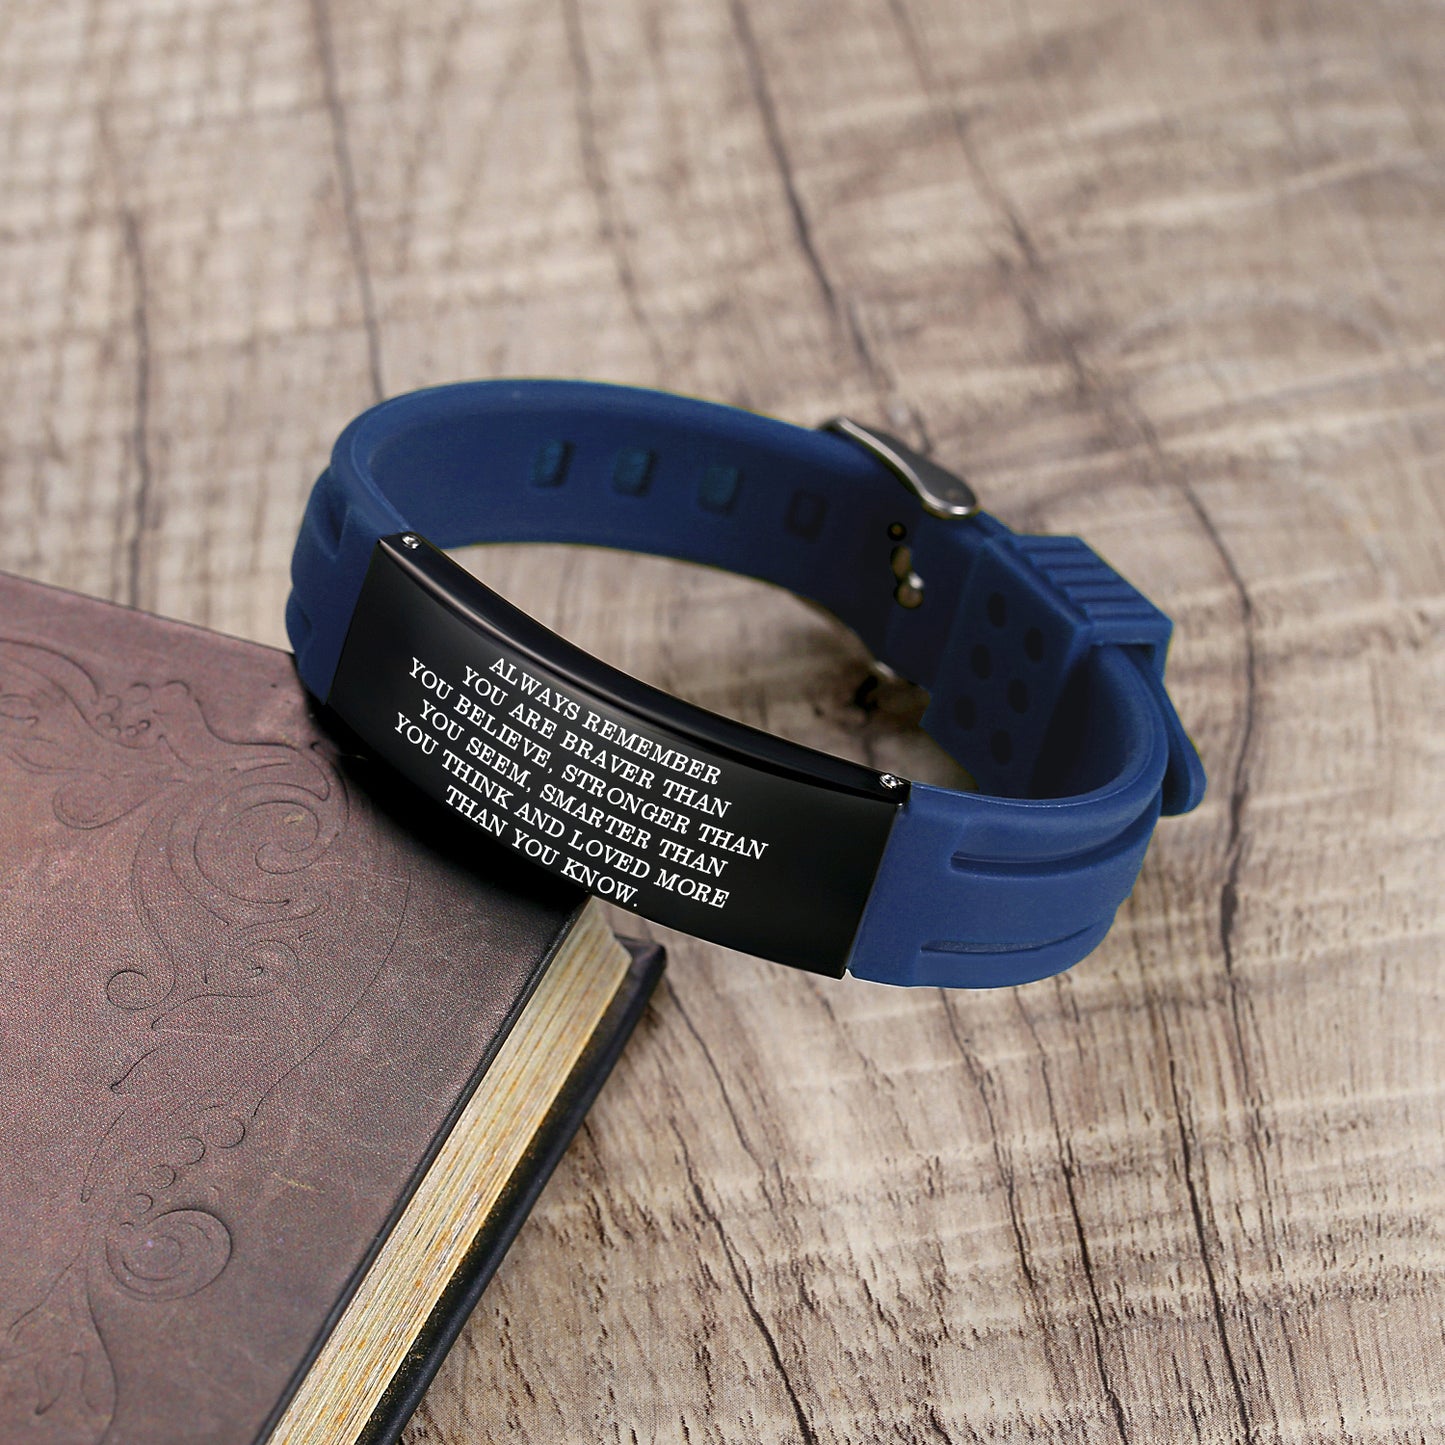 Black Silicone Bracelet to Husband,Boyfriend,son dad.Engraved Love Quote bracelets from Wife,Son,Dad&mom